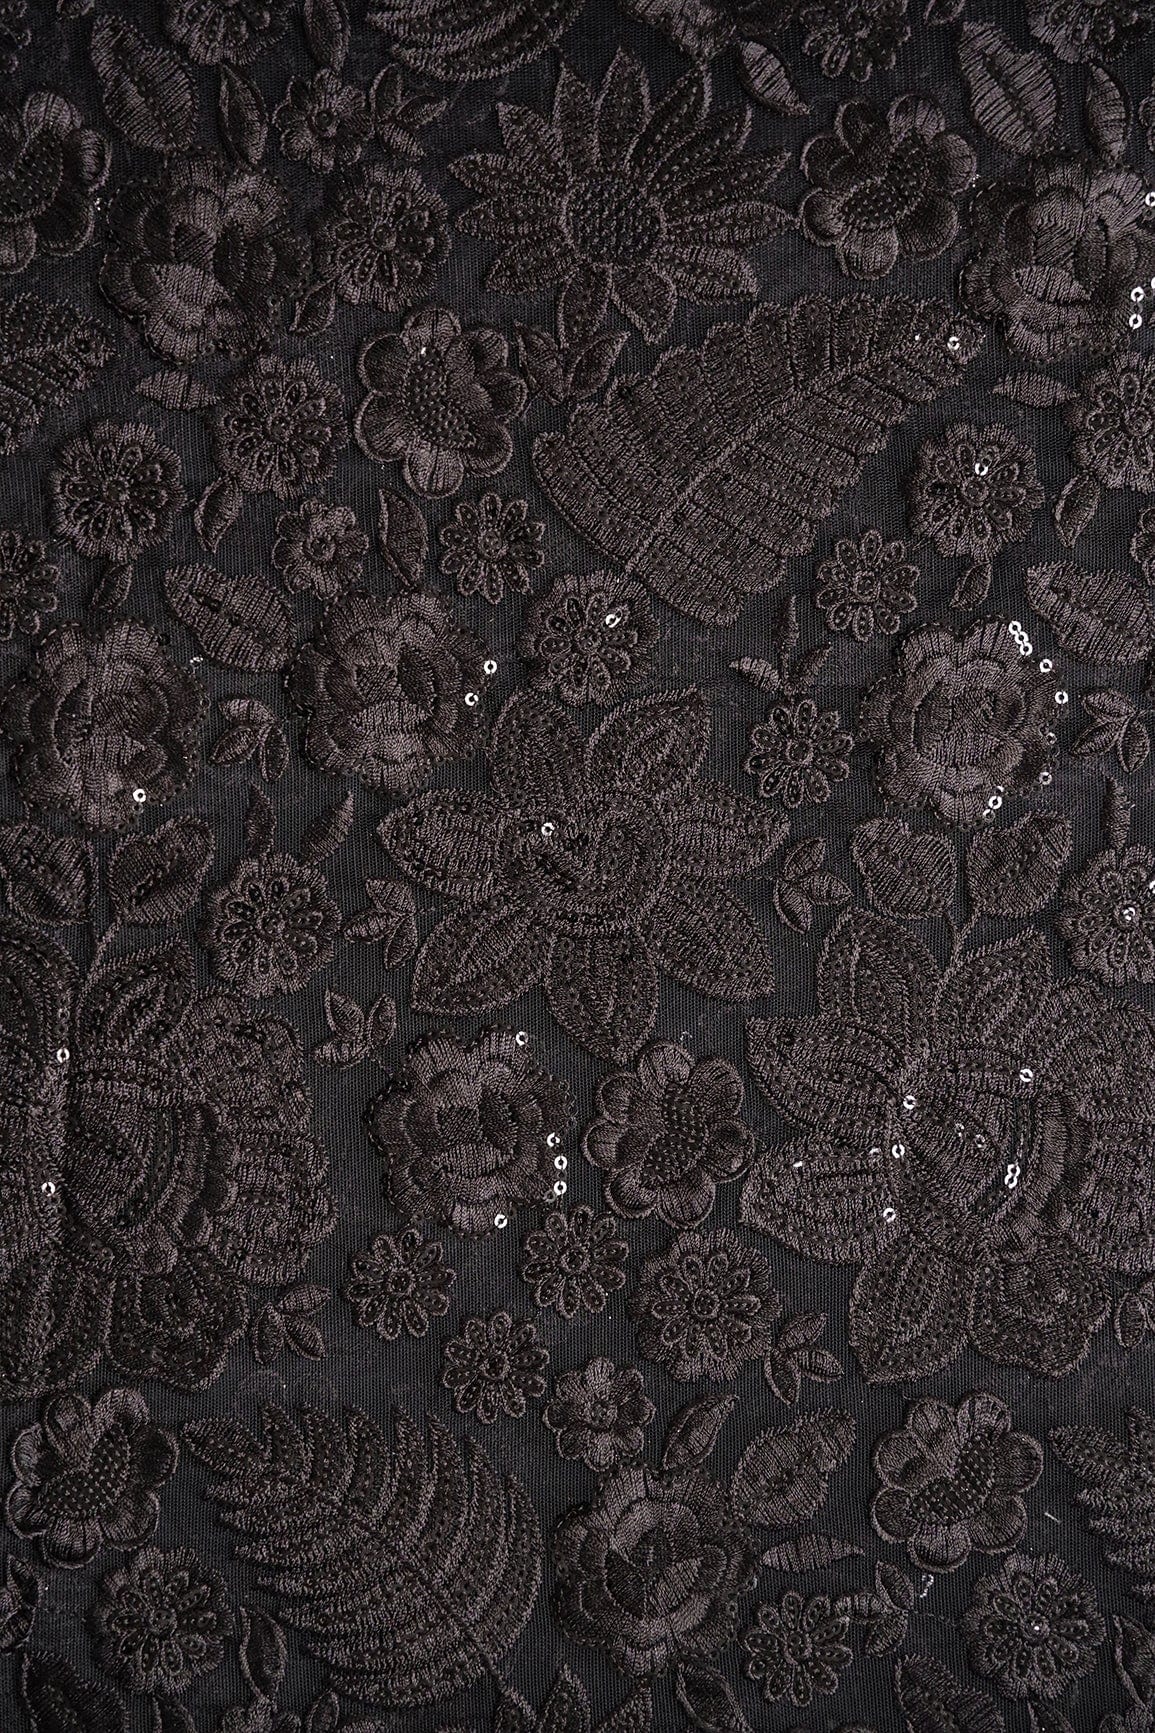 doeraa Embroidery Fabrics Black Thread With Sequins Heavy Floral Embroidery On Black Soft Net Fabric